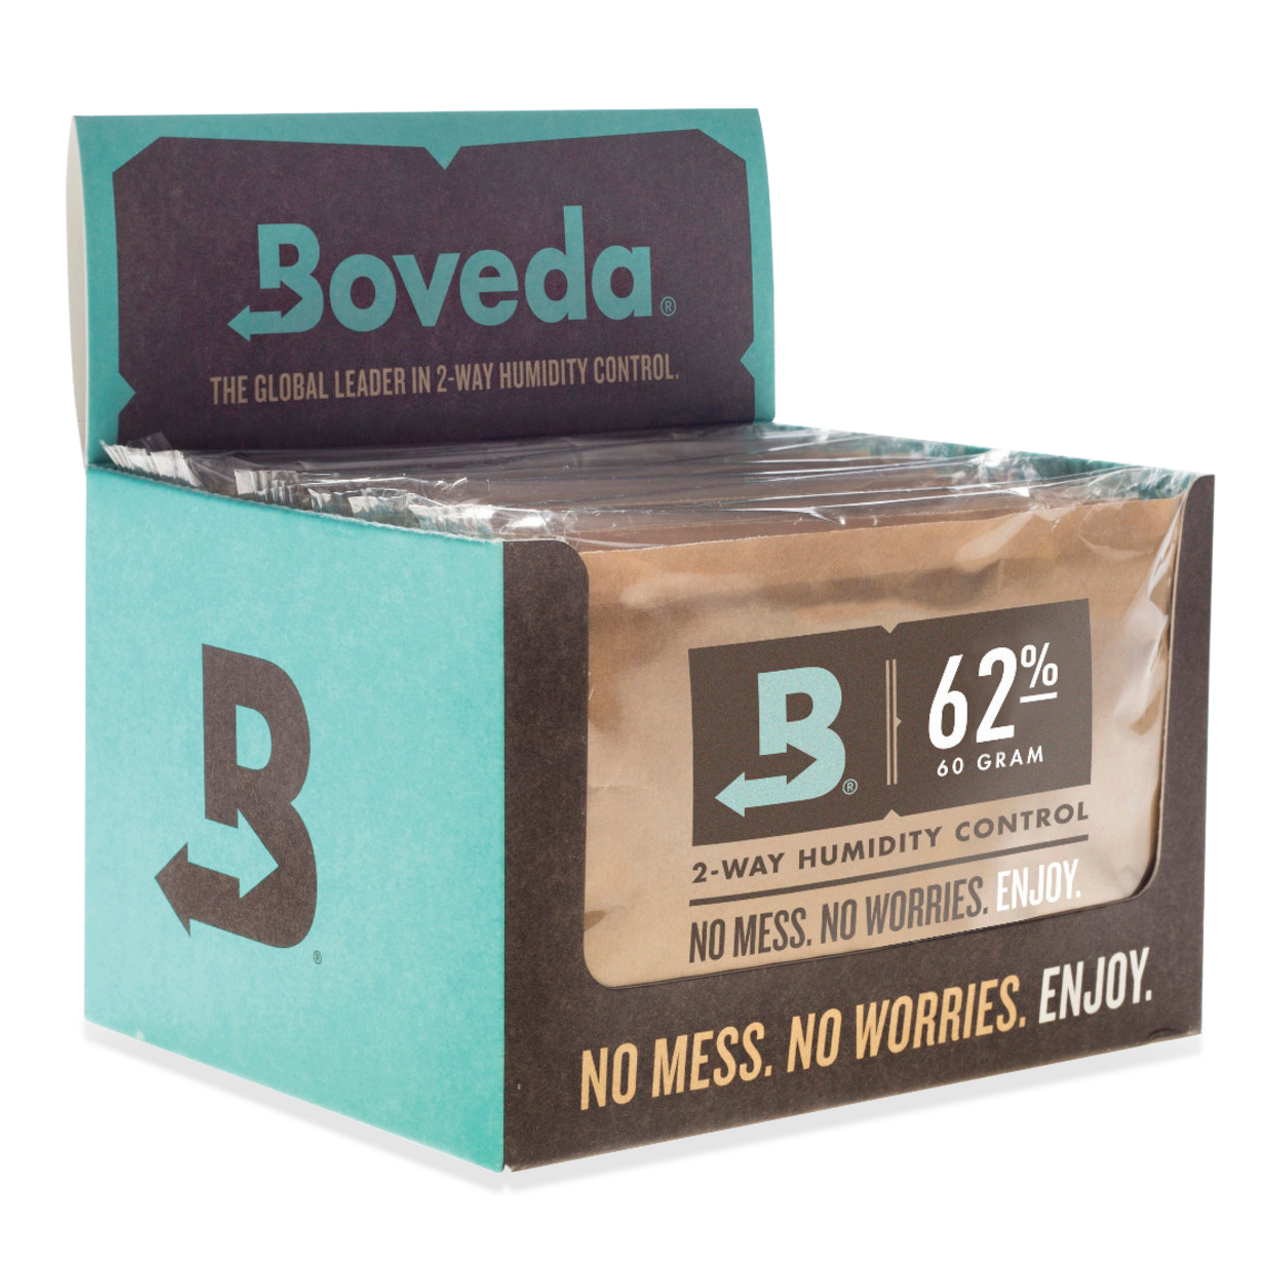 https://cdn11.bigcommerce.com/s-c63ufk/images/stencil/1280x1280/products/806/4745/M_Boveda-62-R-H-Humidity-12-Pack-Large-67-Gram-Exterior-1__85617.1568219486.png?c=2?imbypass=on